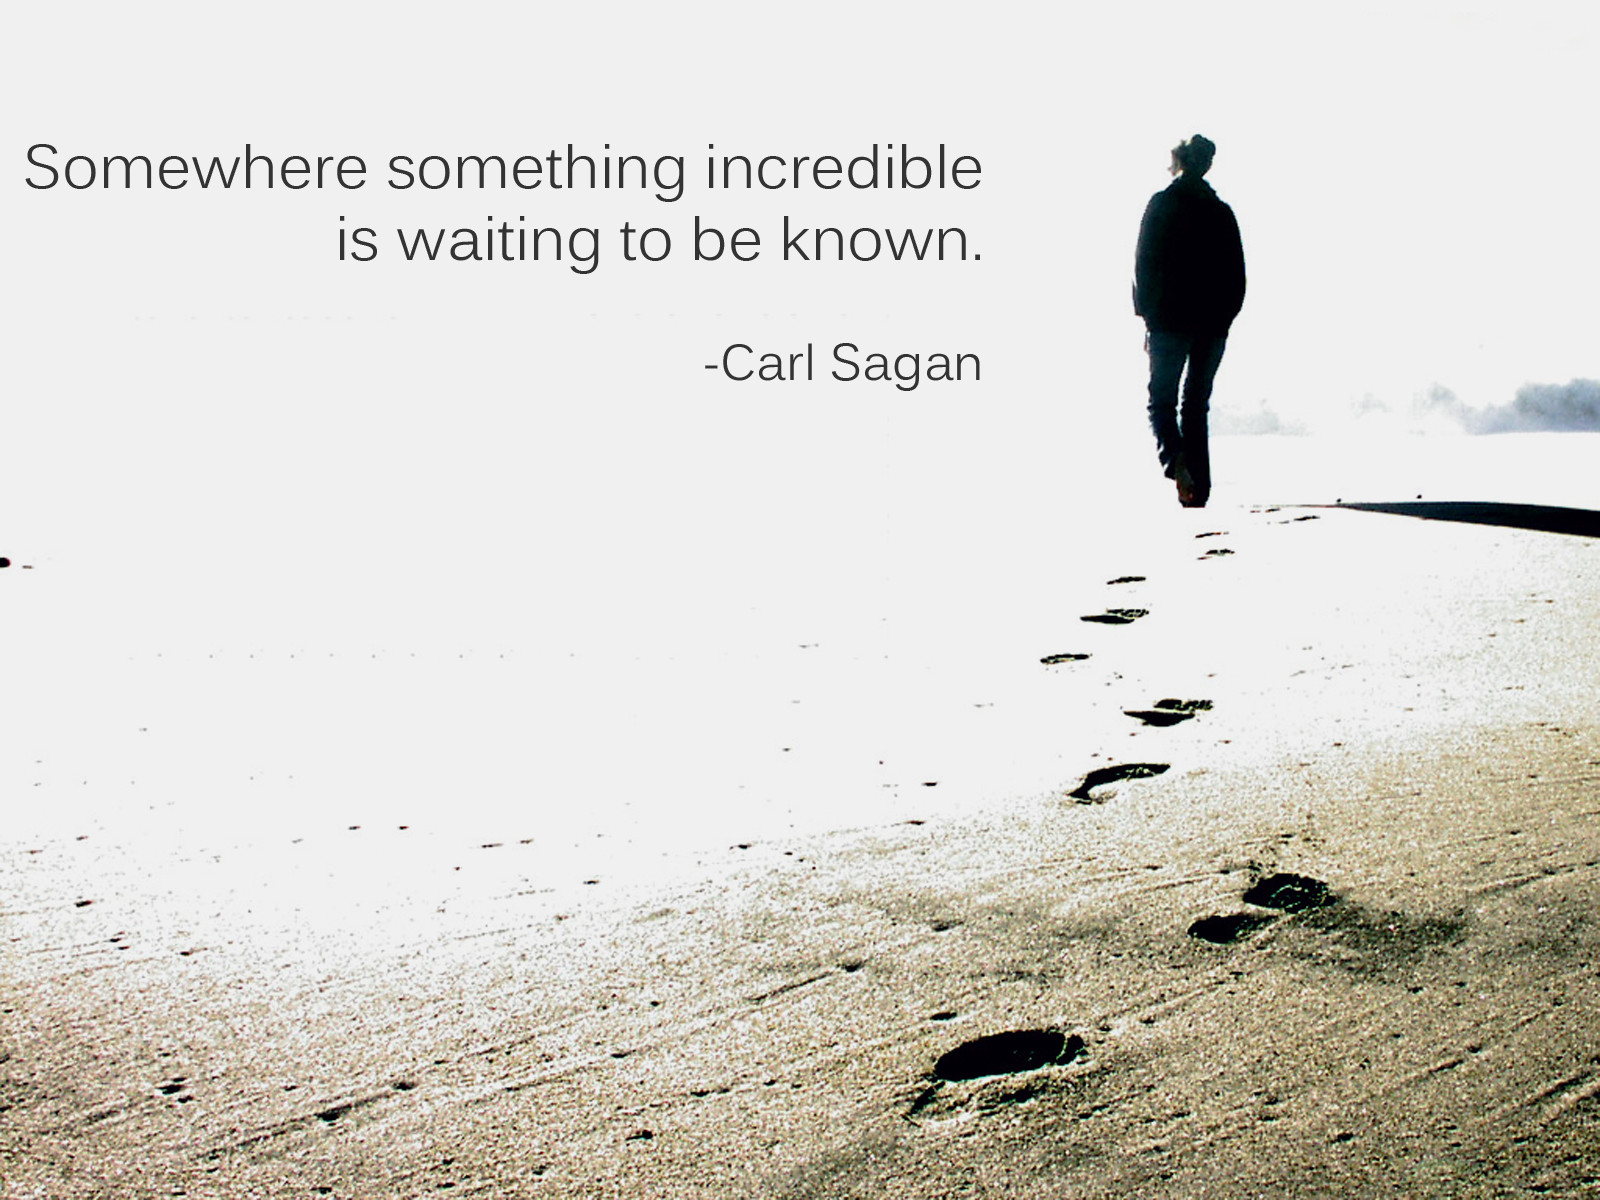 Motivational Wallpaper on Life: Somewhere something incredible is waiting  by Carl sagan - Dont Give Up World